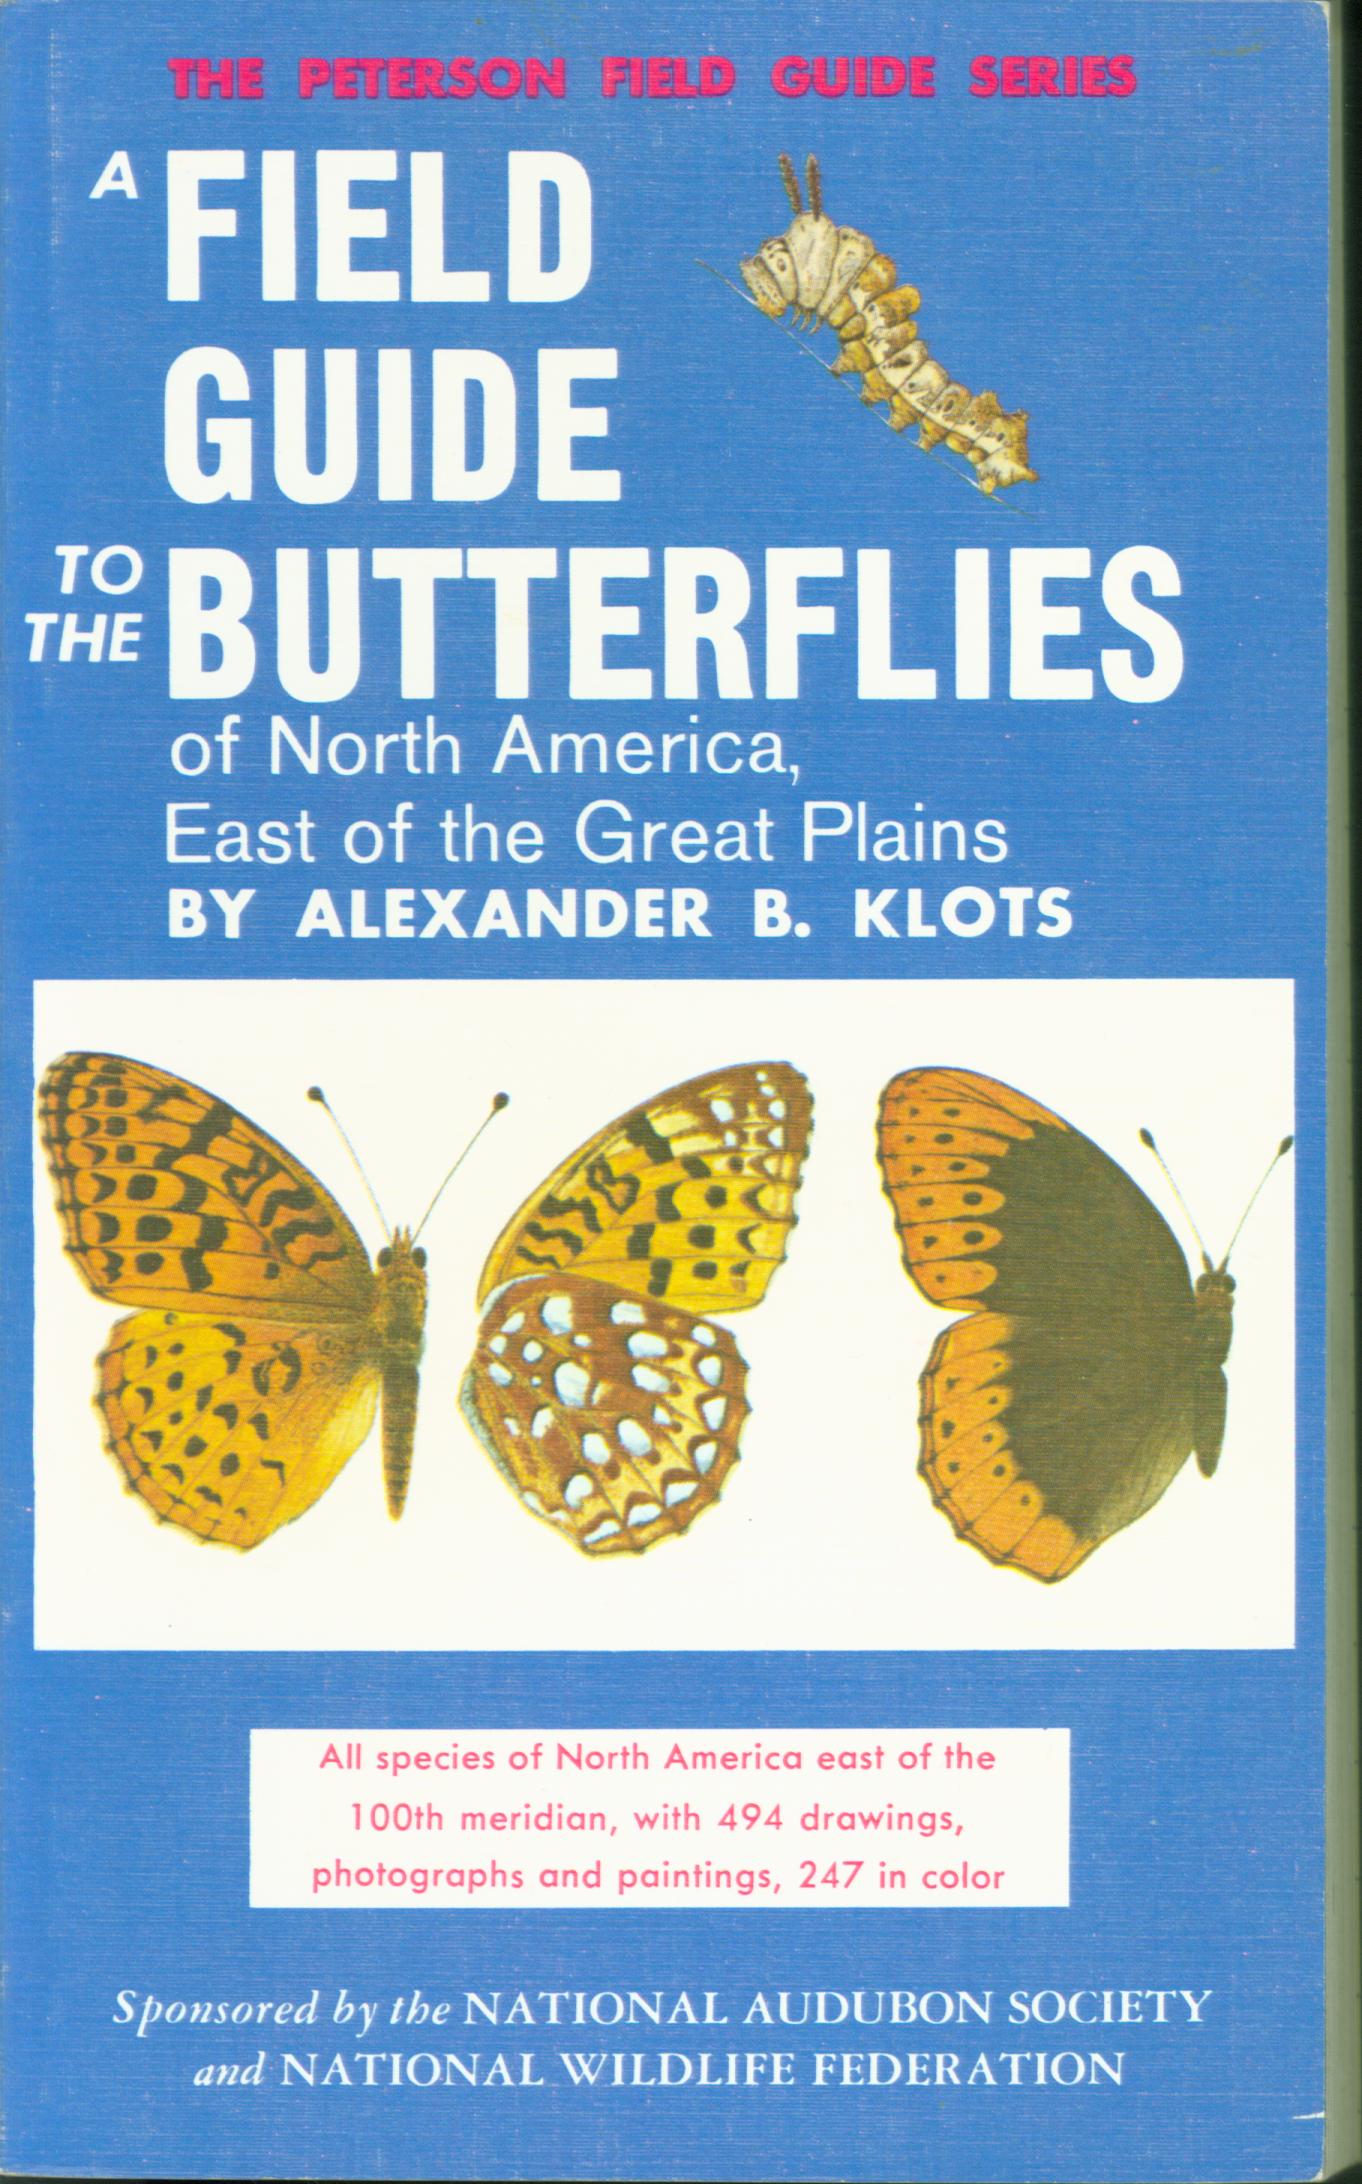 A FIELD GUIDE TO THE BUTTERFLIES OF NORTH AMERICA EAST OF THE GREAT PLAINS.